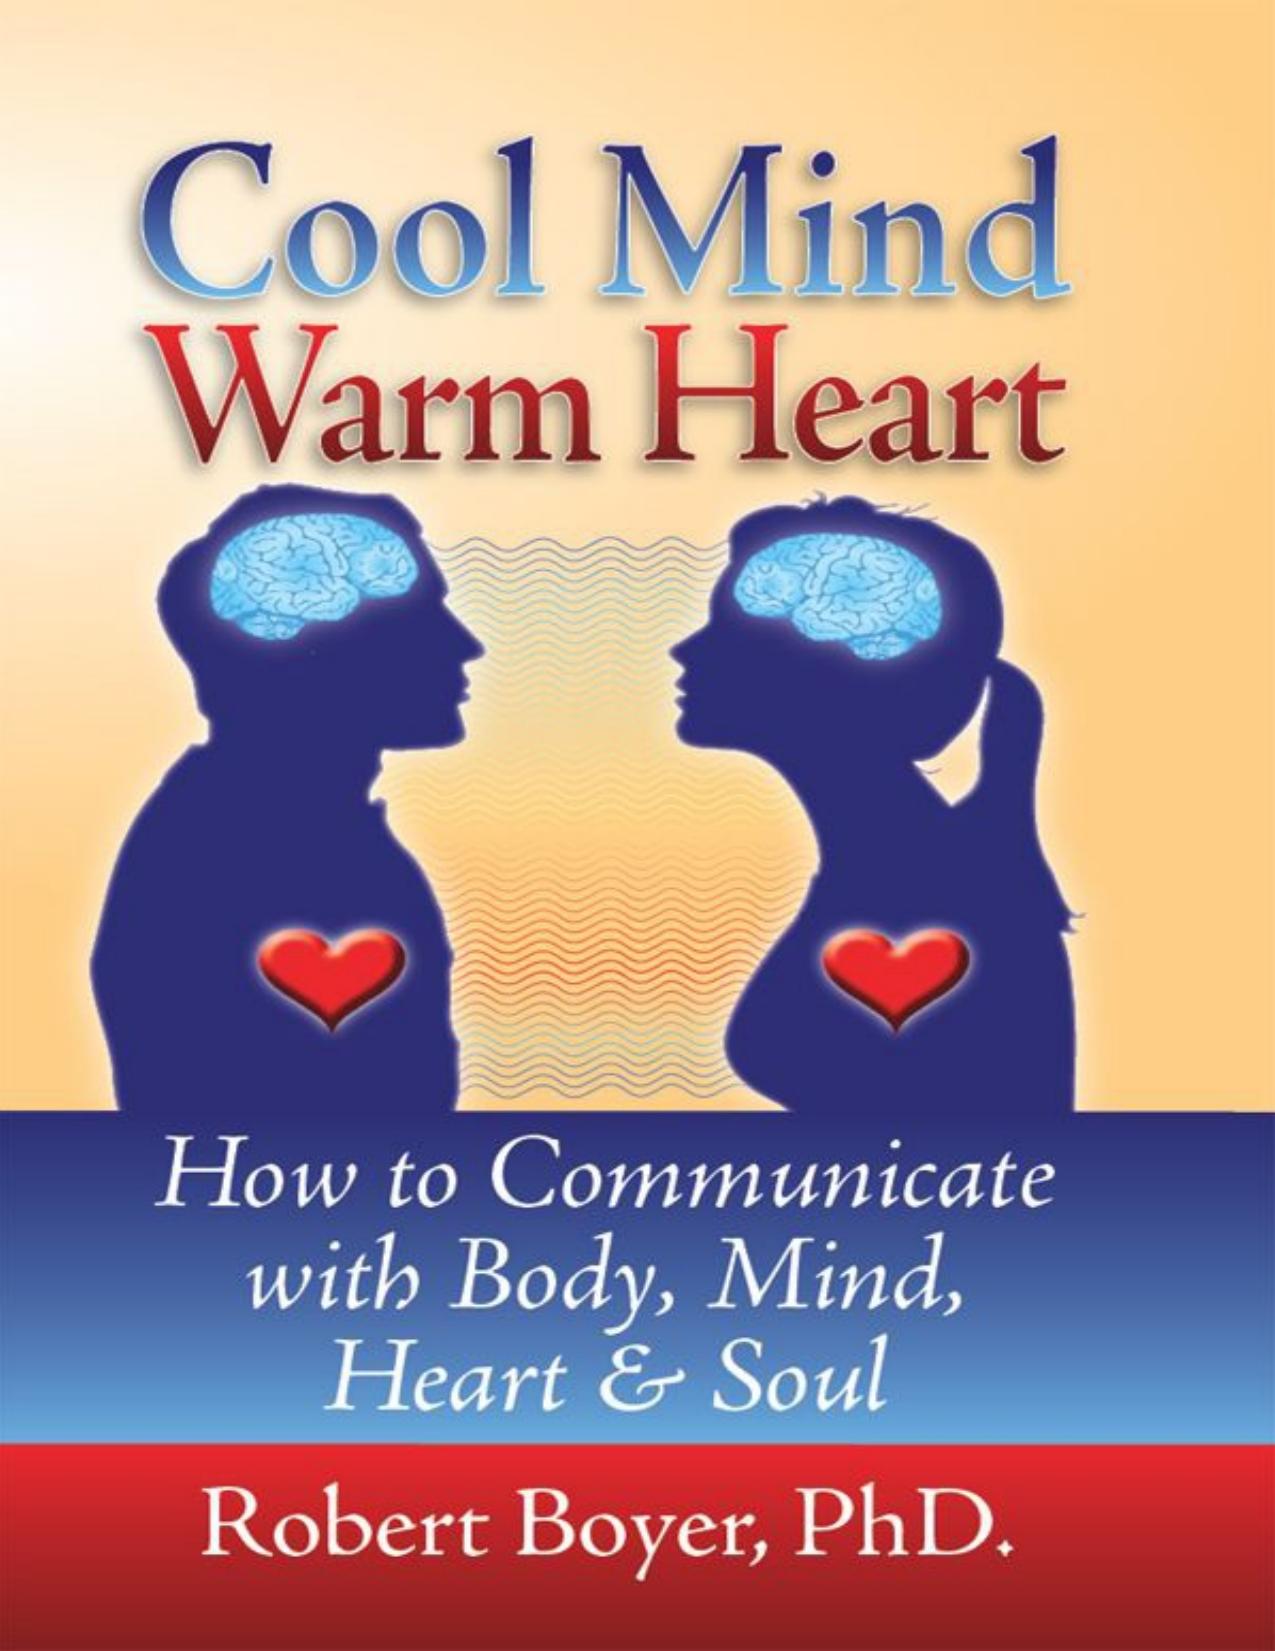 Cool Mind Warm Heart How to Communicate with Body, Mind, Heart & Soul by Robert Boyer.jpg